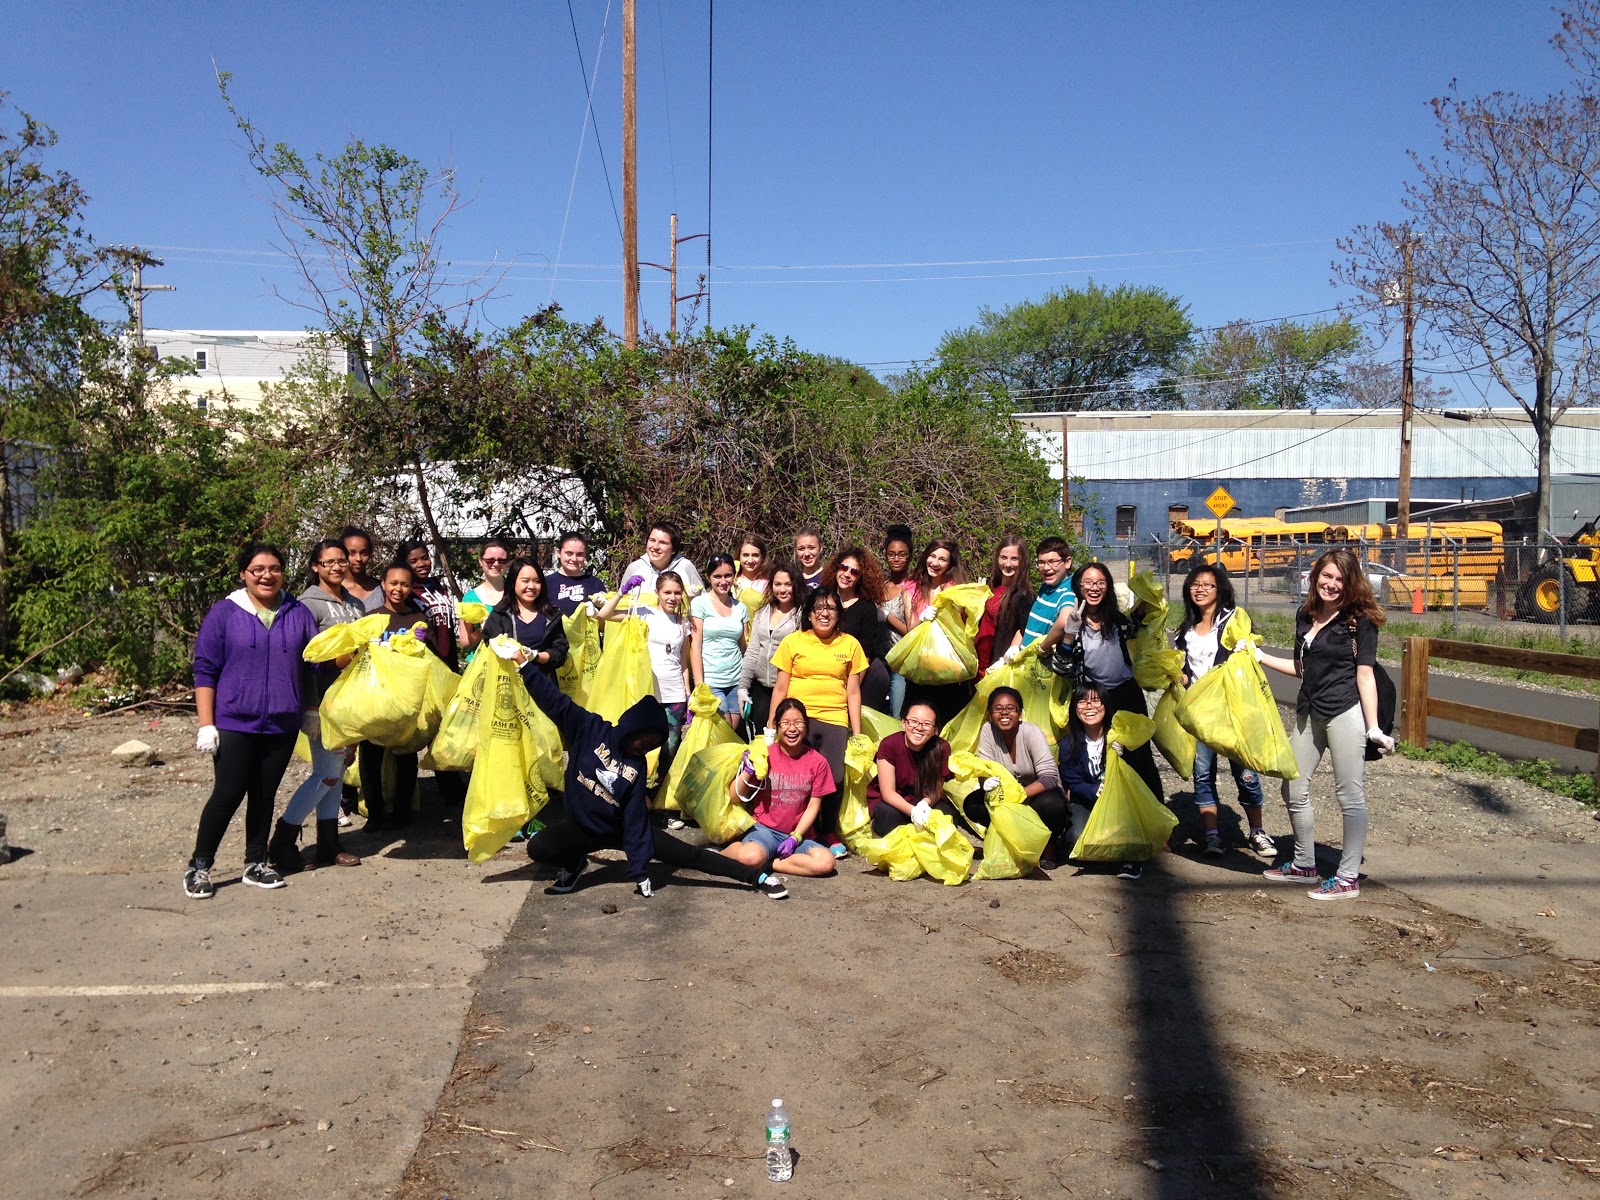 Students line up for a picture with large bags of garbage they had collected on their Beautification Day. Photo by Abbey Dick.